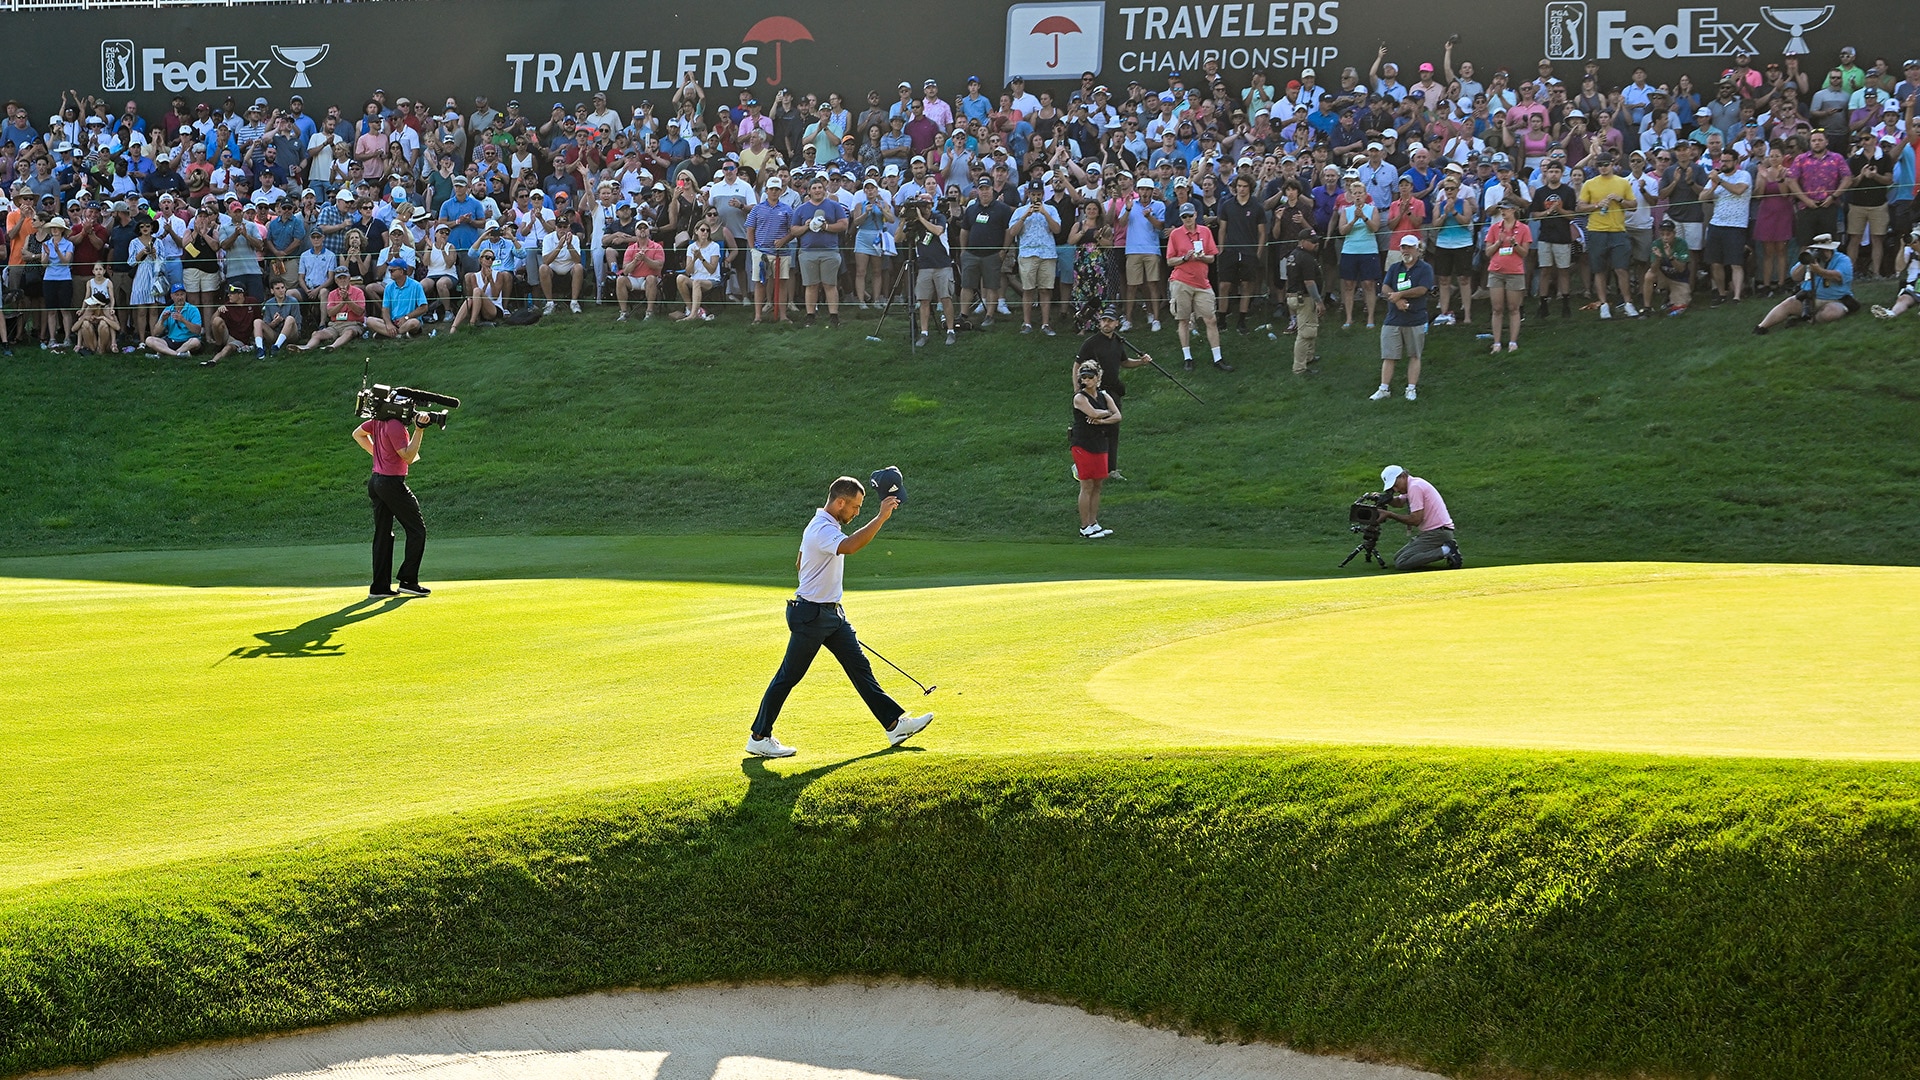 A week after U.S. Open, star-studded field on tap for Travelers Championship